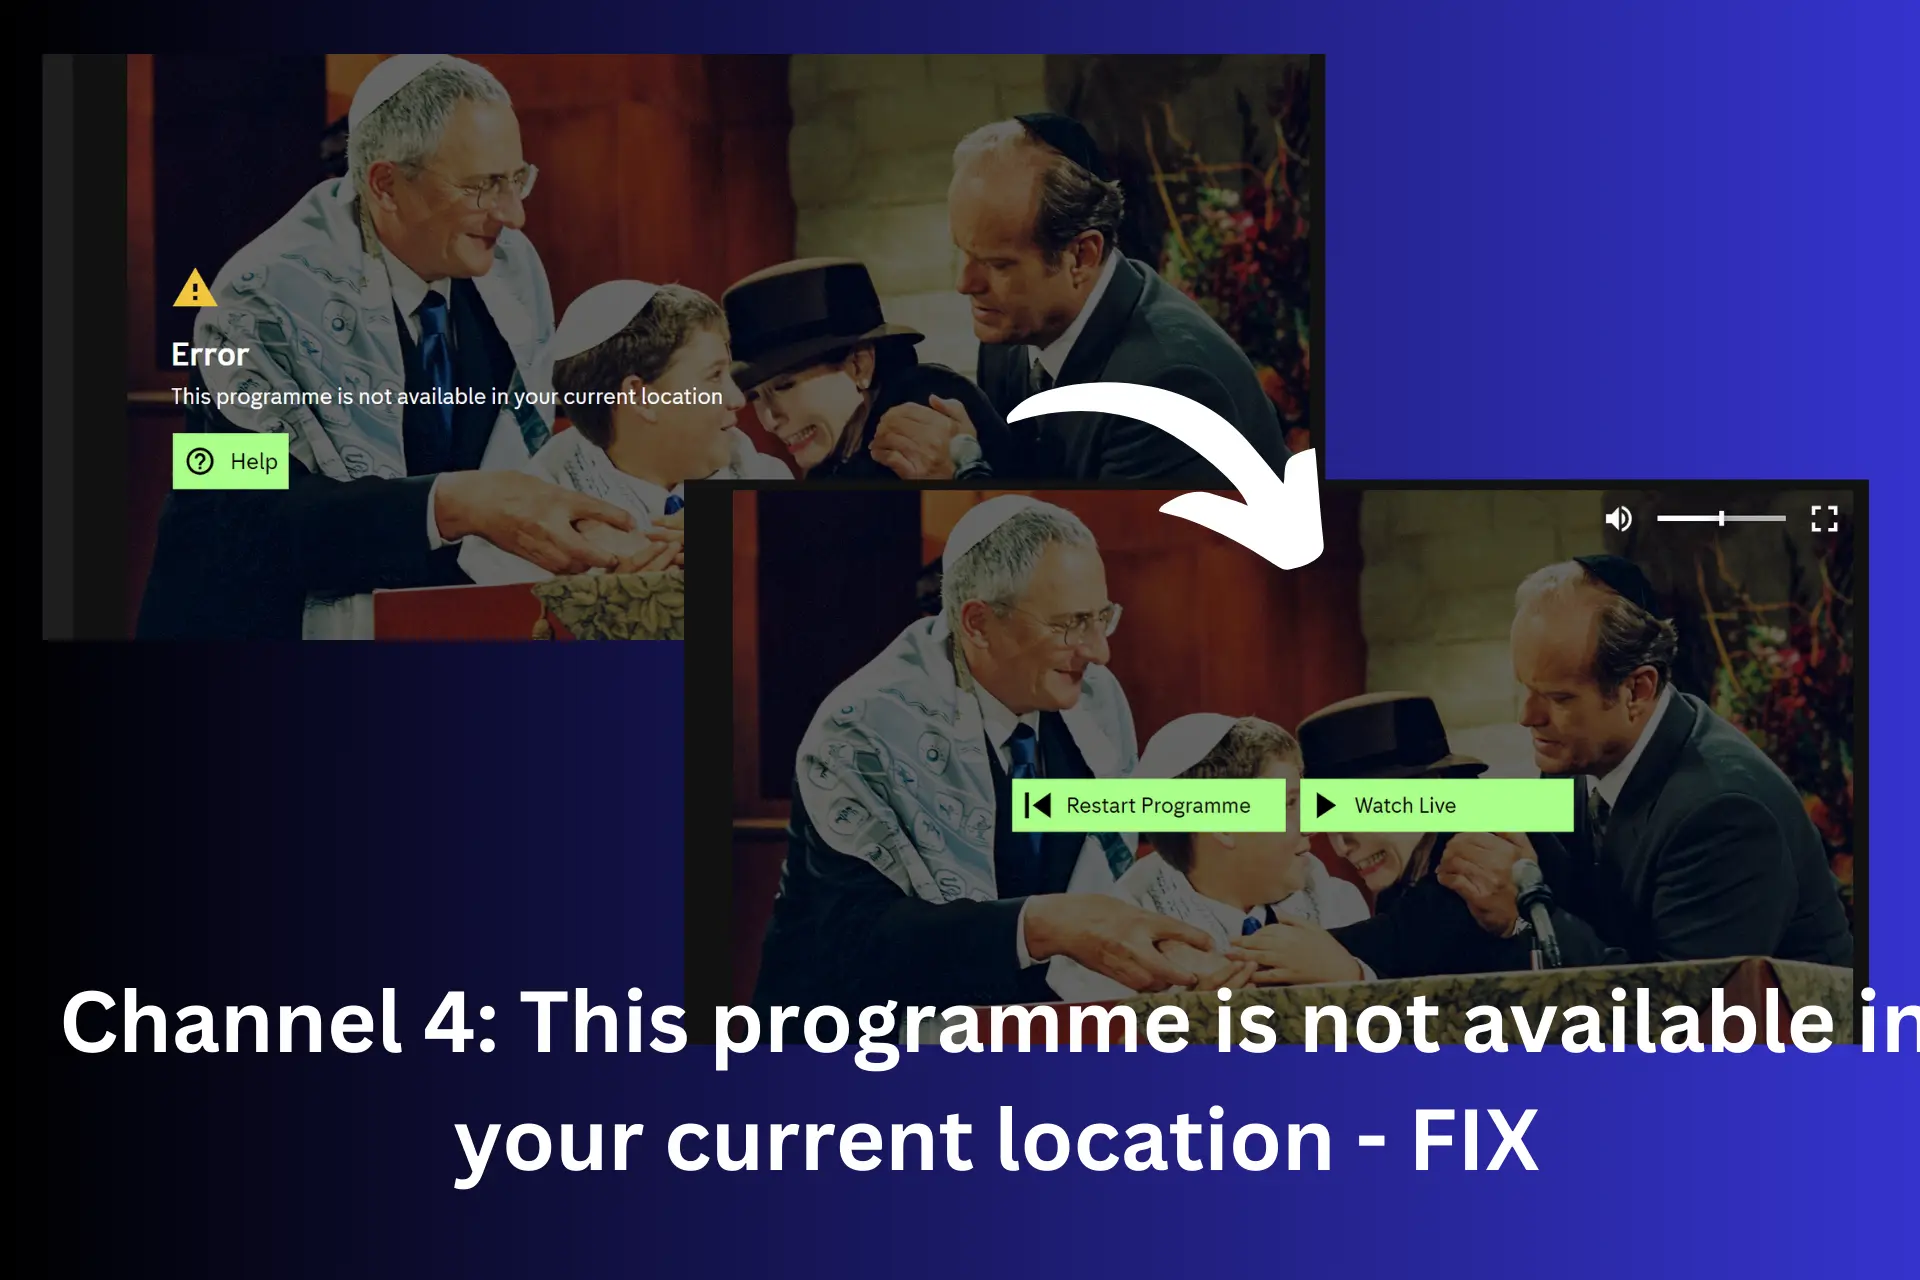 This programme is not available in your current location